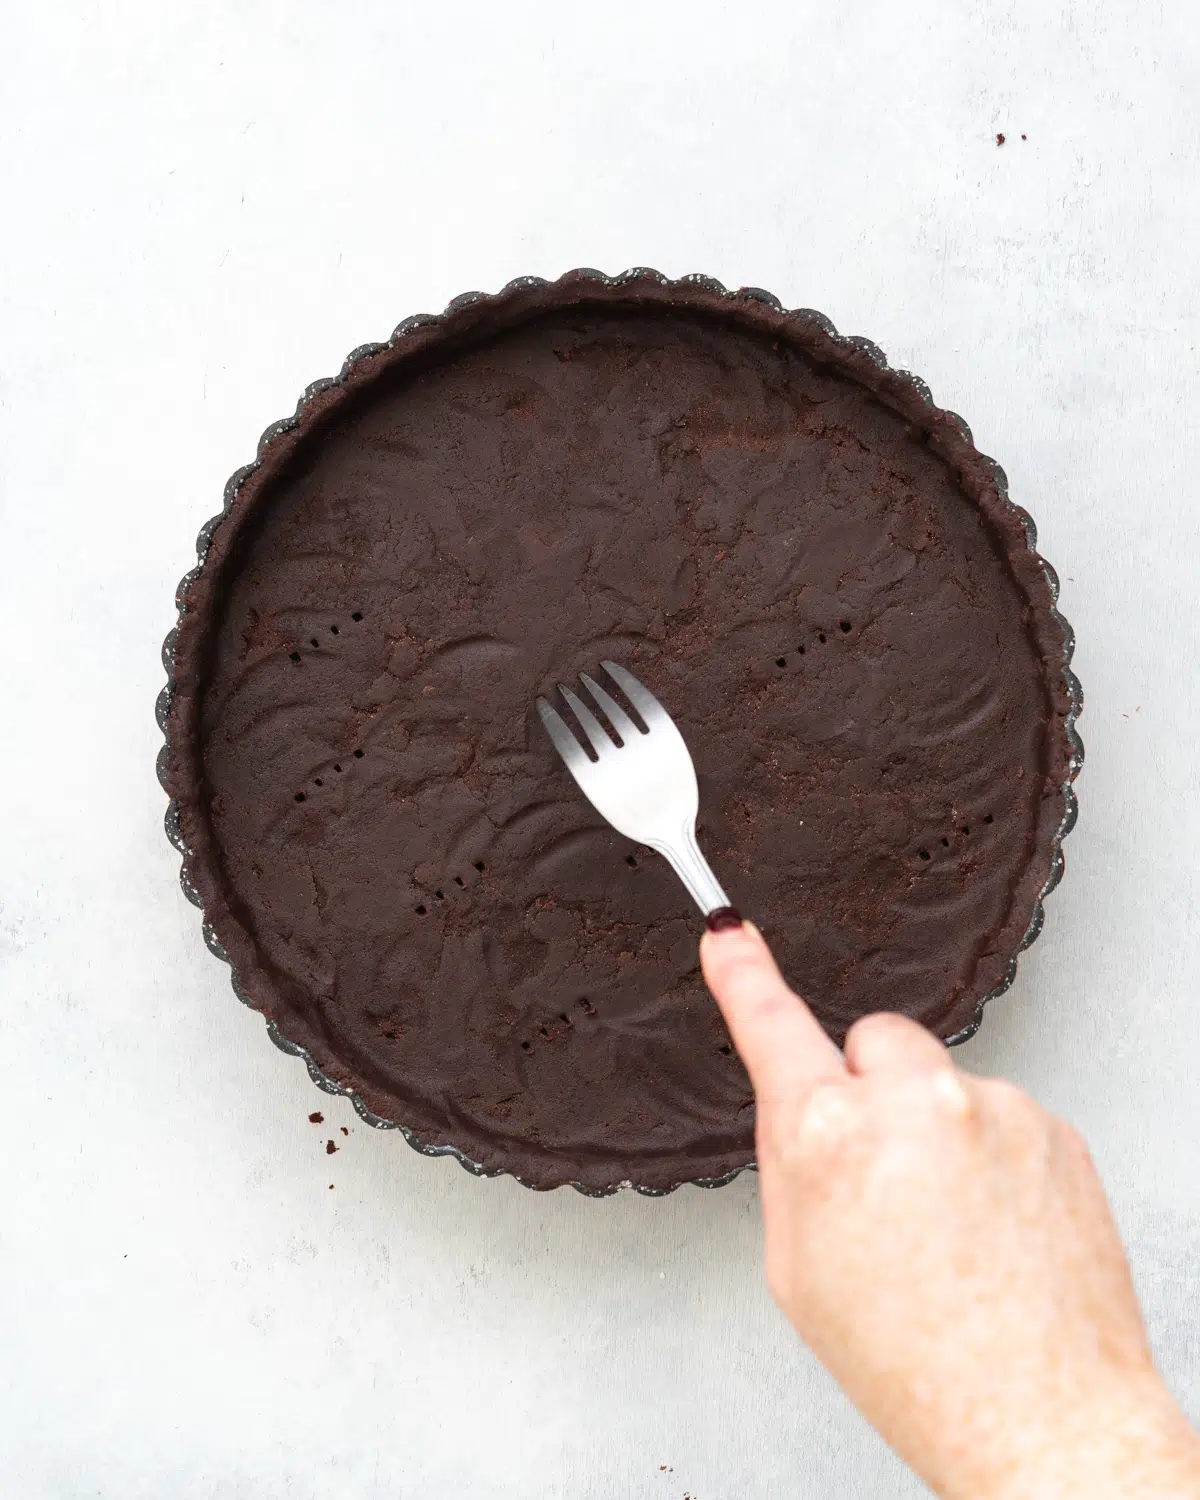 chocolate shortcrust pastry in a tart tin with hand using a fork to prick air holes in the base.